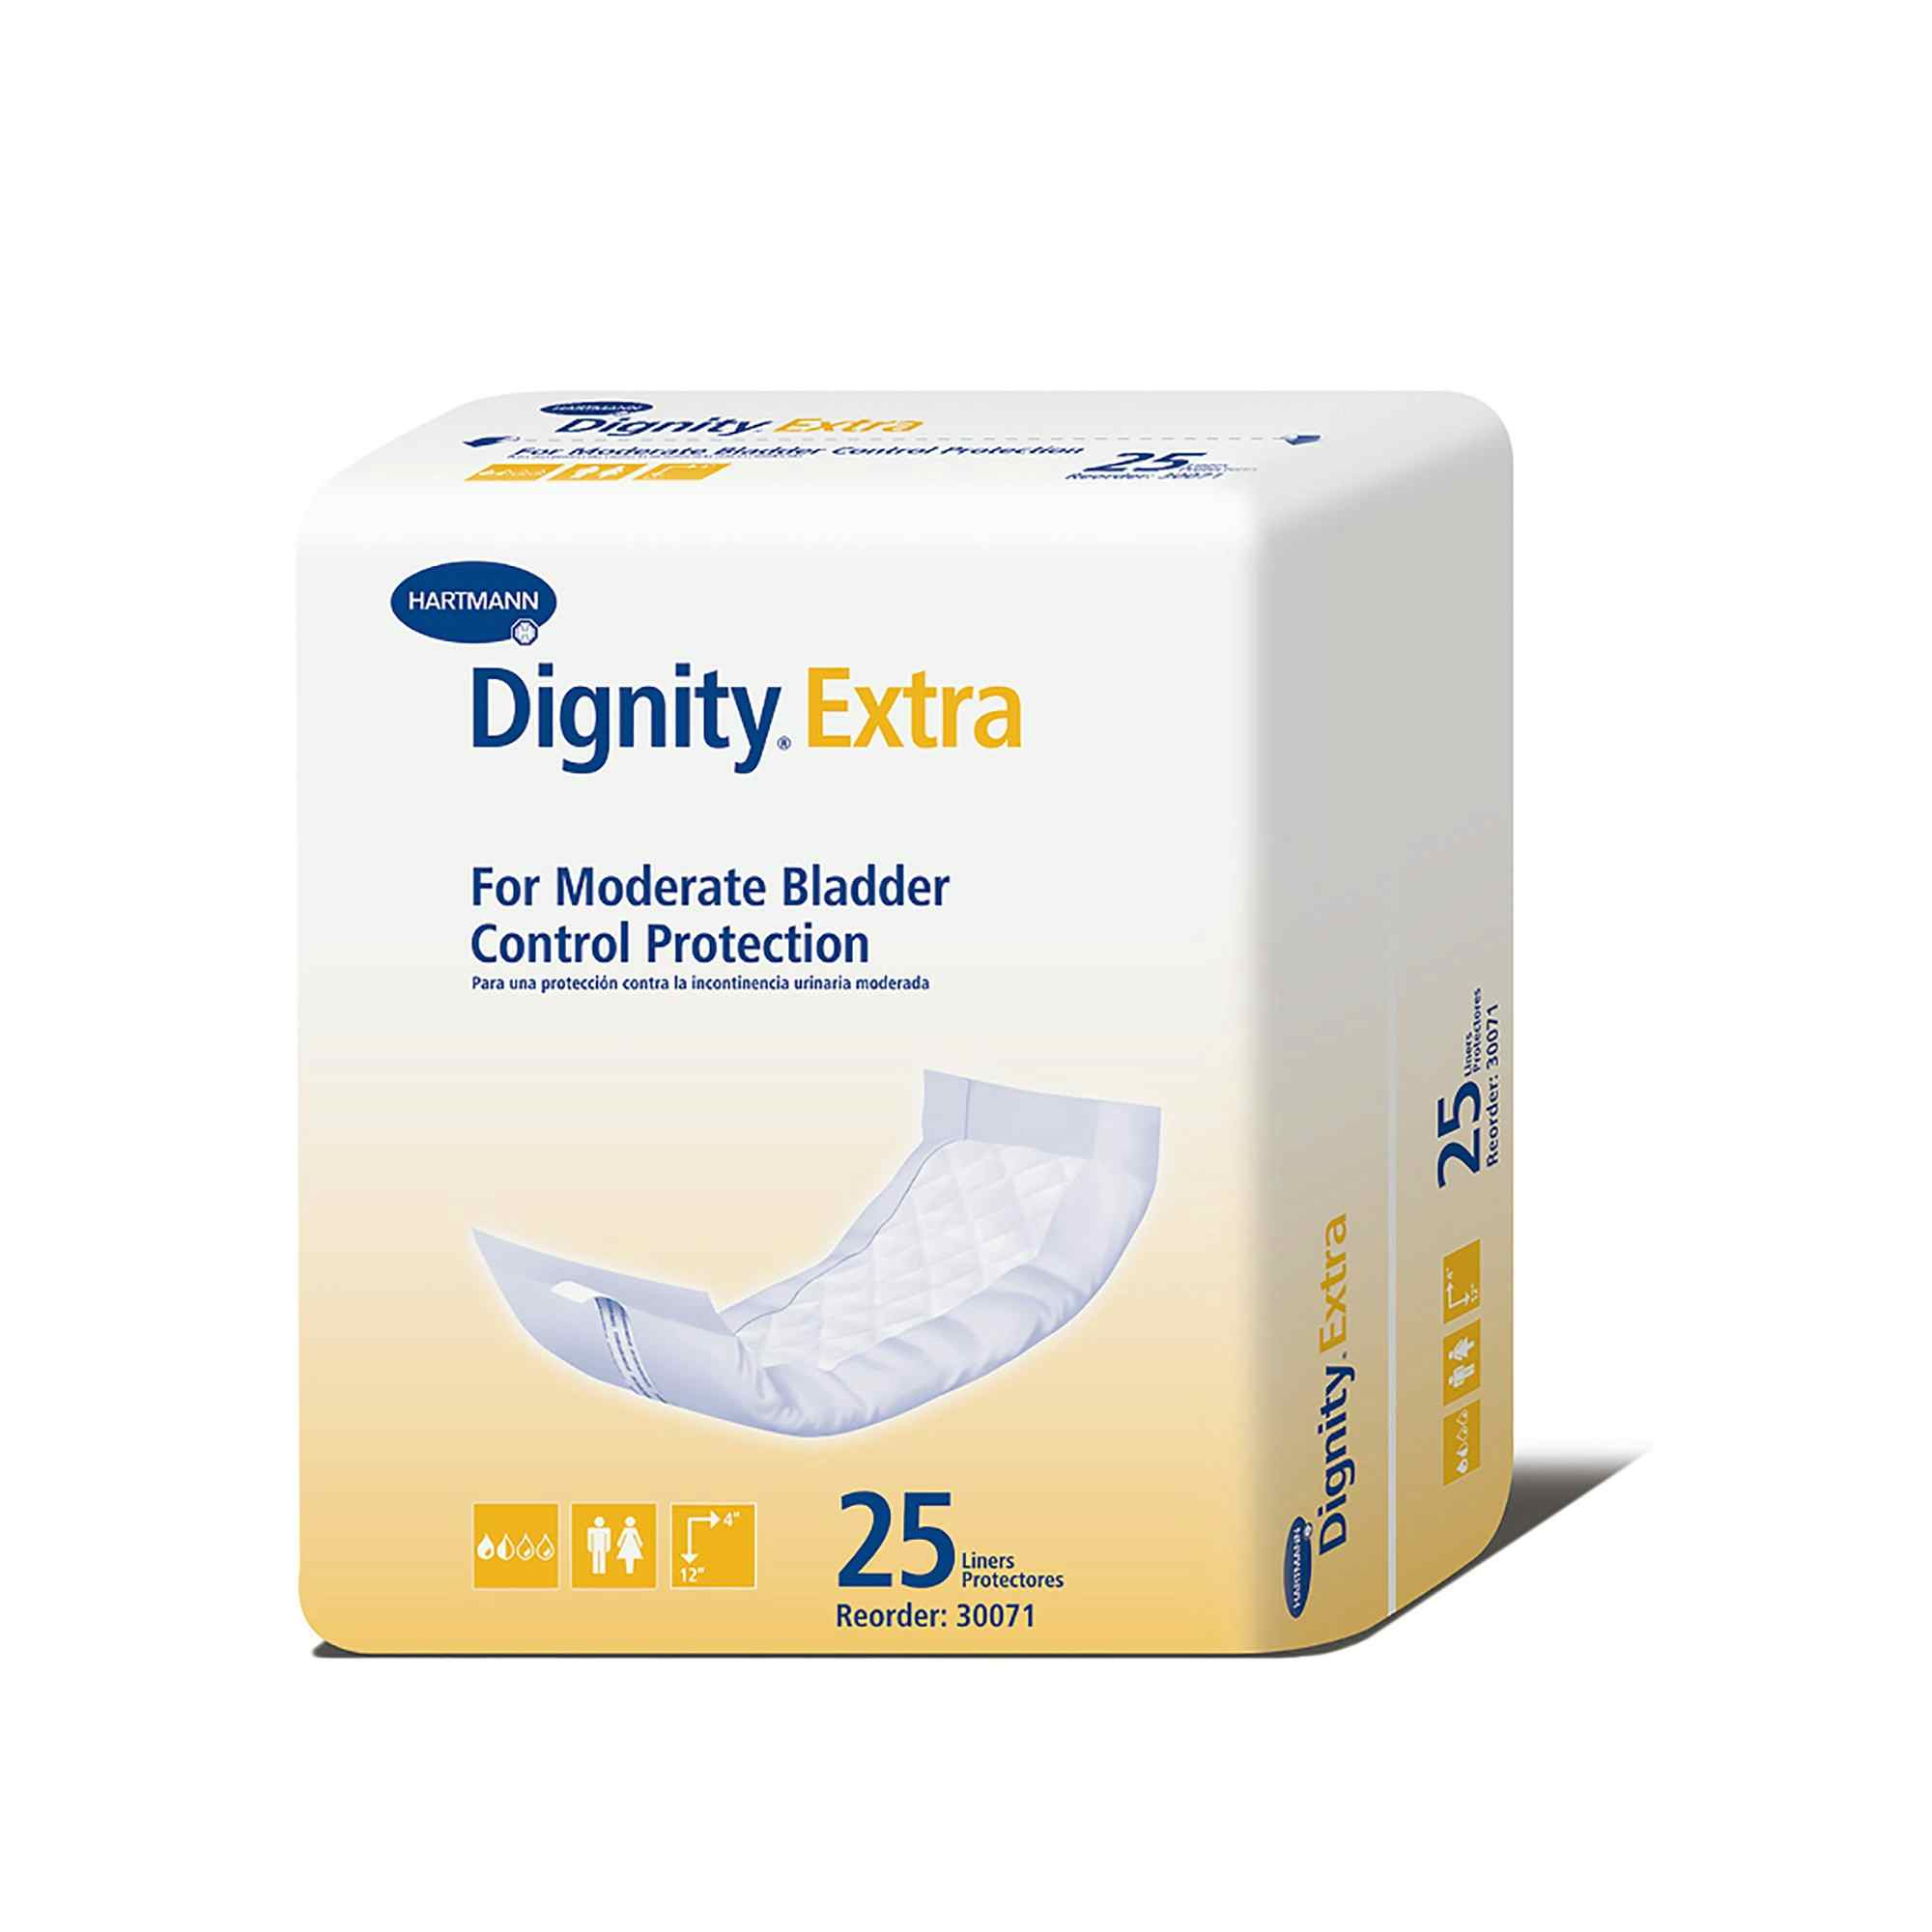 Dignity Extra Adult Unisex Disposable Incontinence Liner, Moderate Absorbency , 30071, Bag of 25